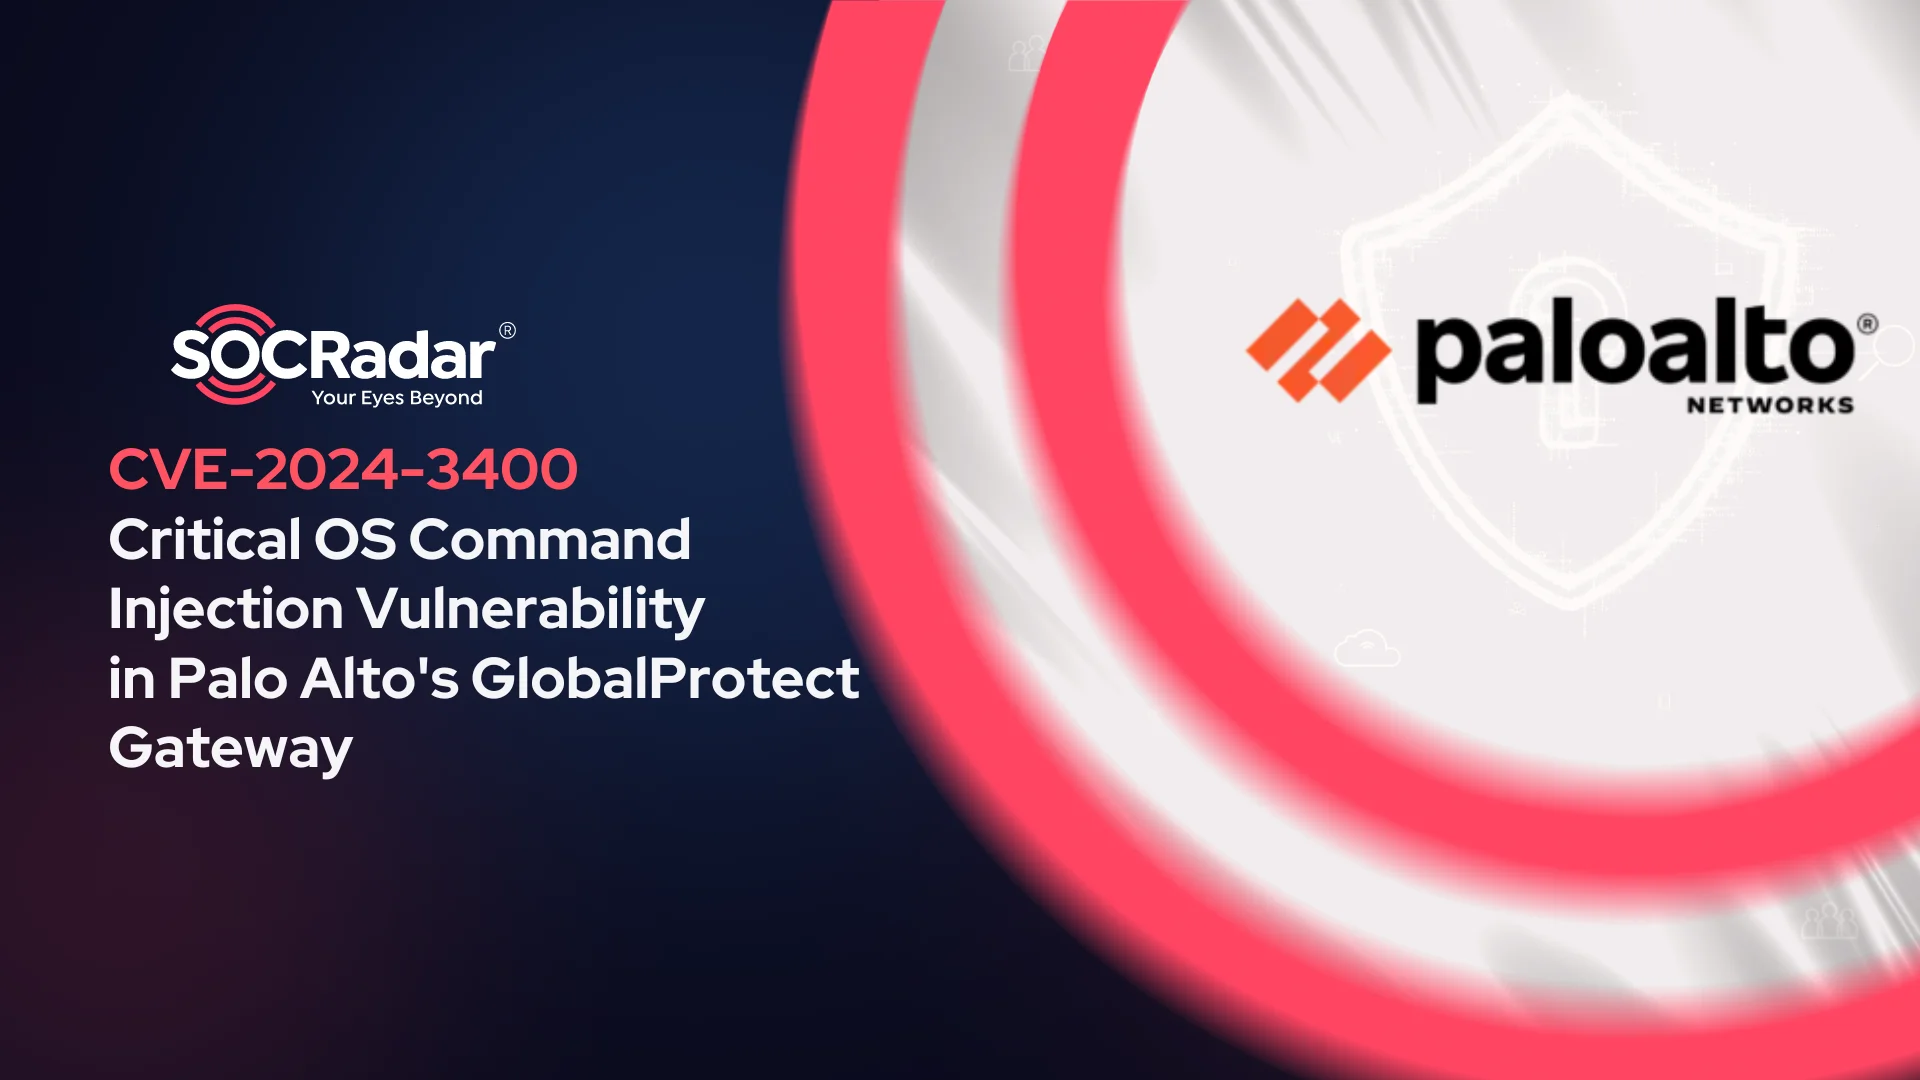 SOCRadar® Cyber Intelligence Inc. | Critical OS Command Injection Vulnerability in Palo Alto’s GlobalProtect Gateway: CVE-2024-3400. The patch is not available yet.